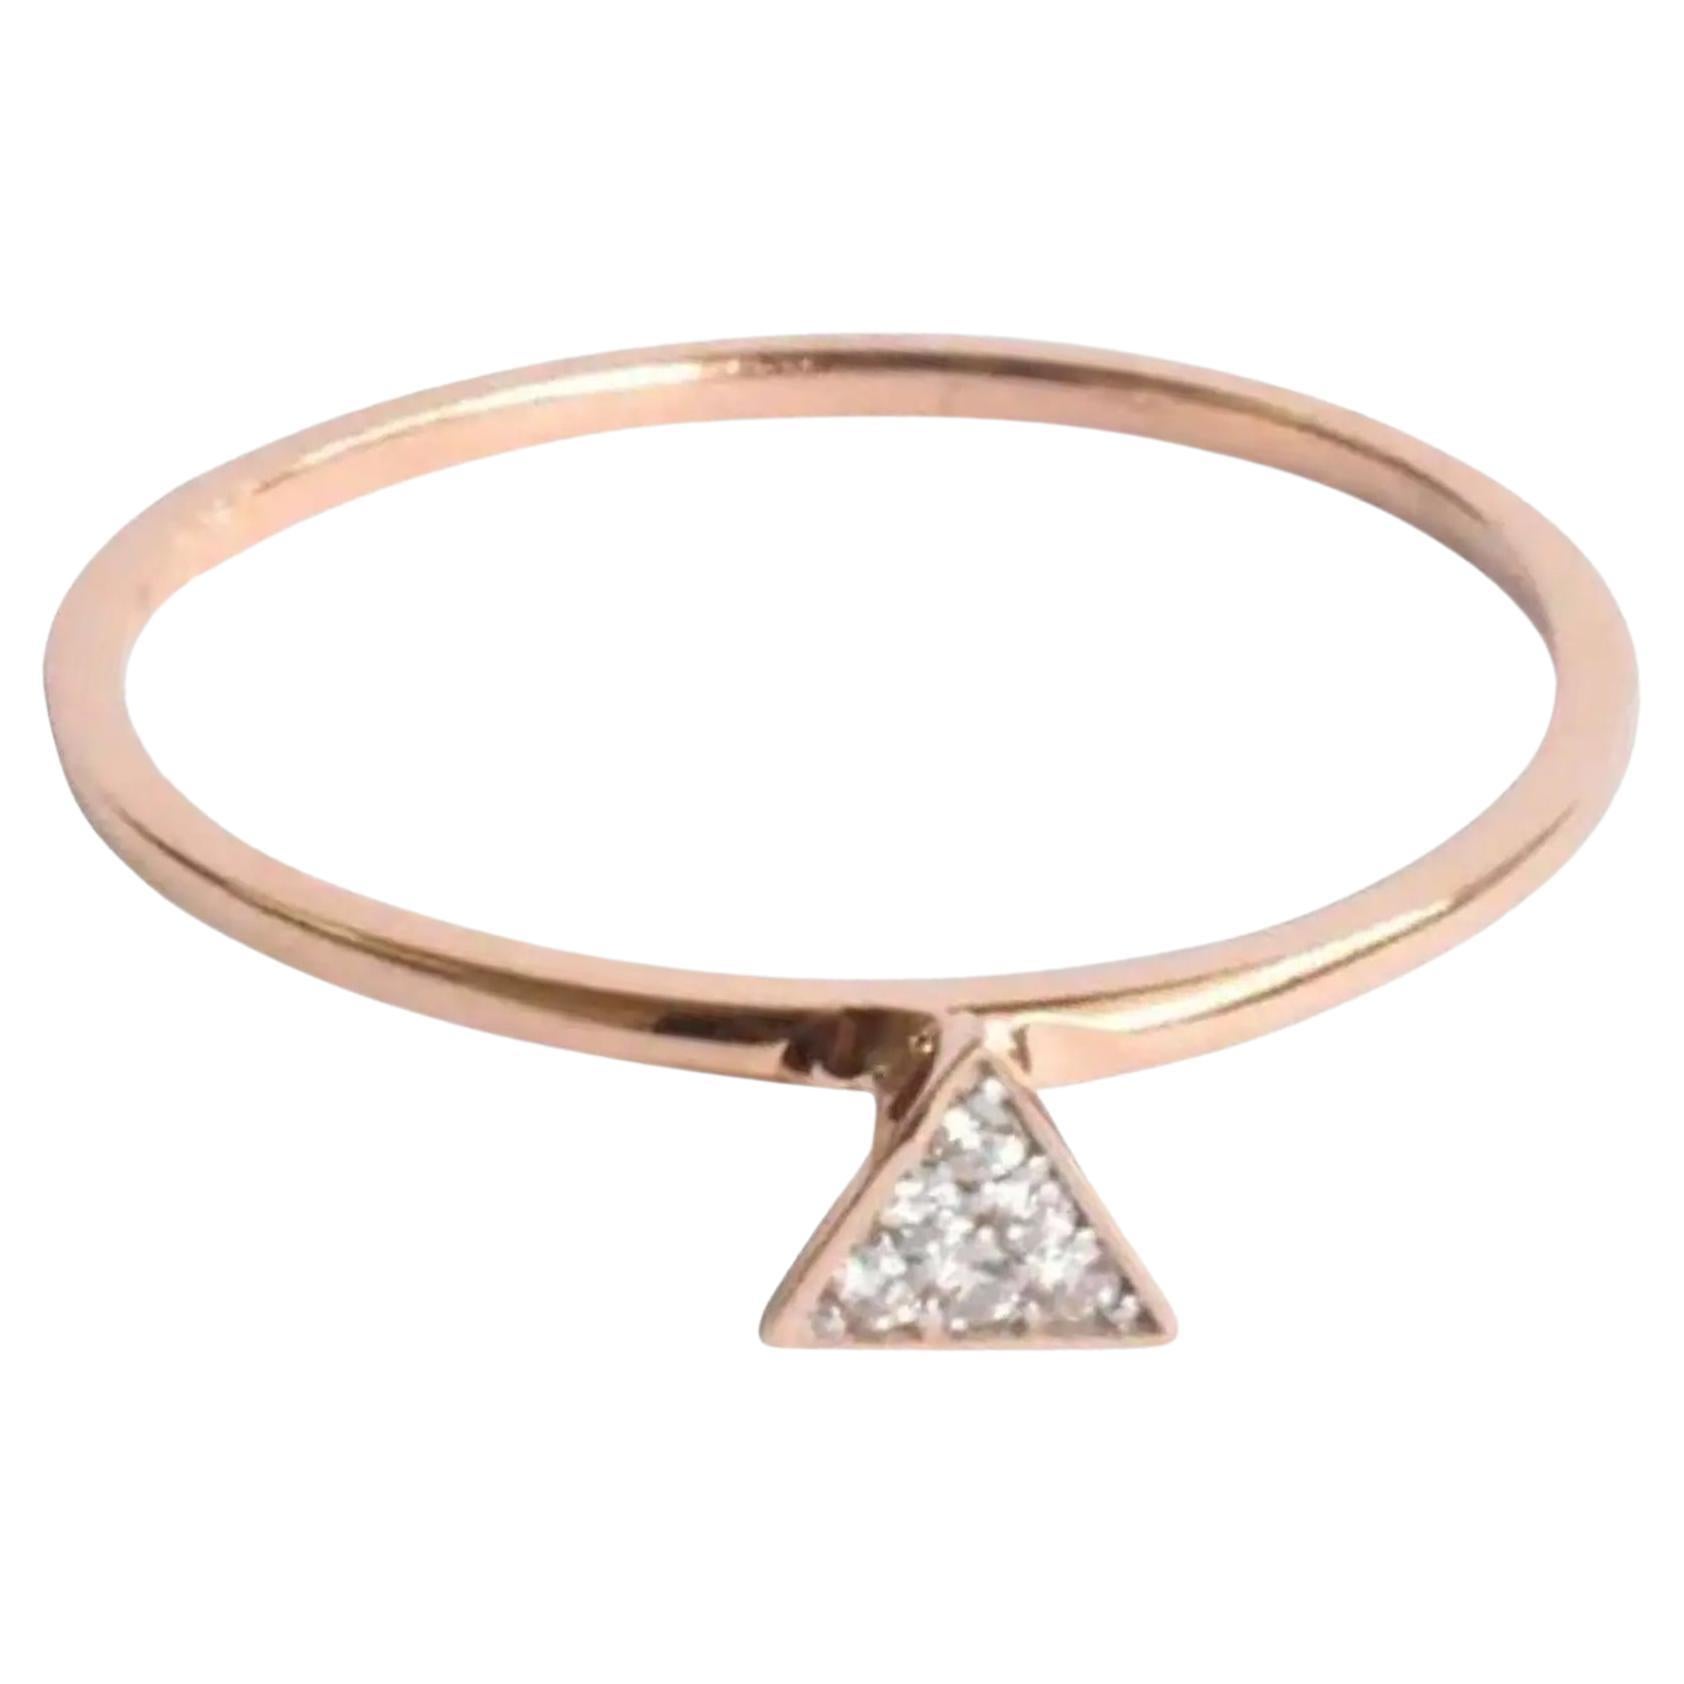 For Sale:  14k Gold Triangle Stacking Ring with White Pave Diamonds Minimalist Ring